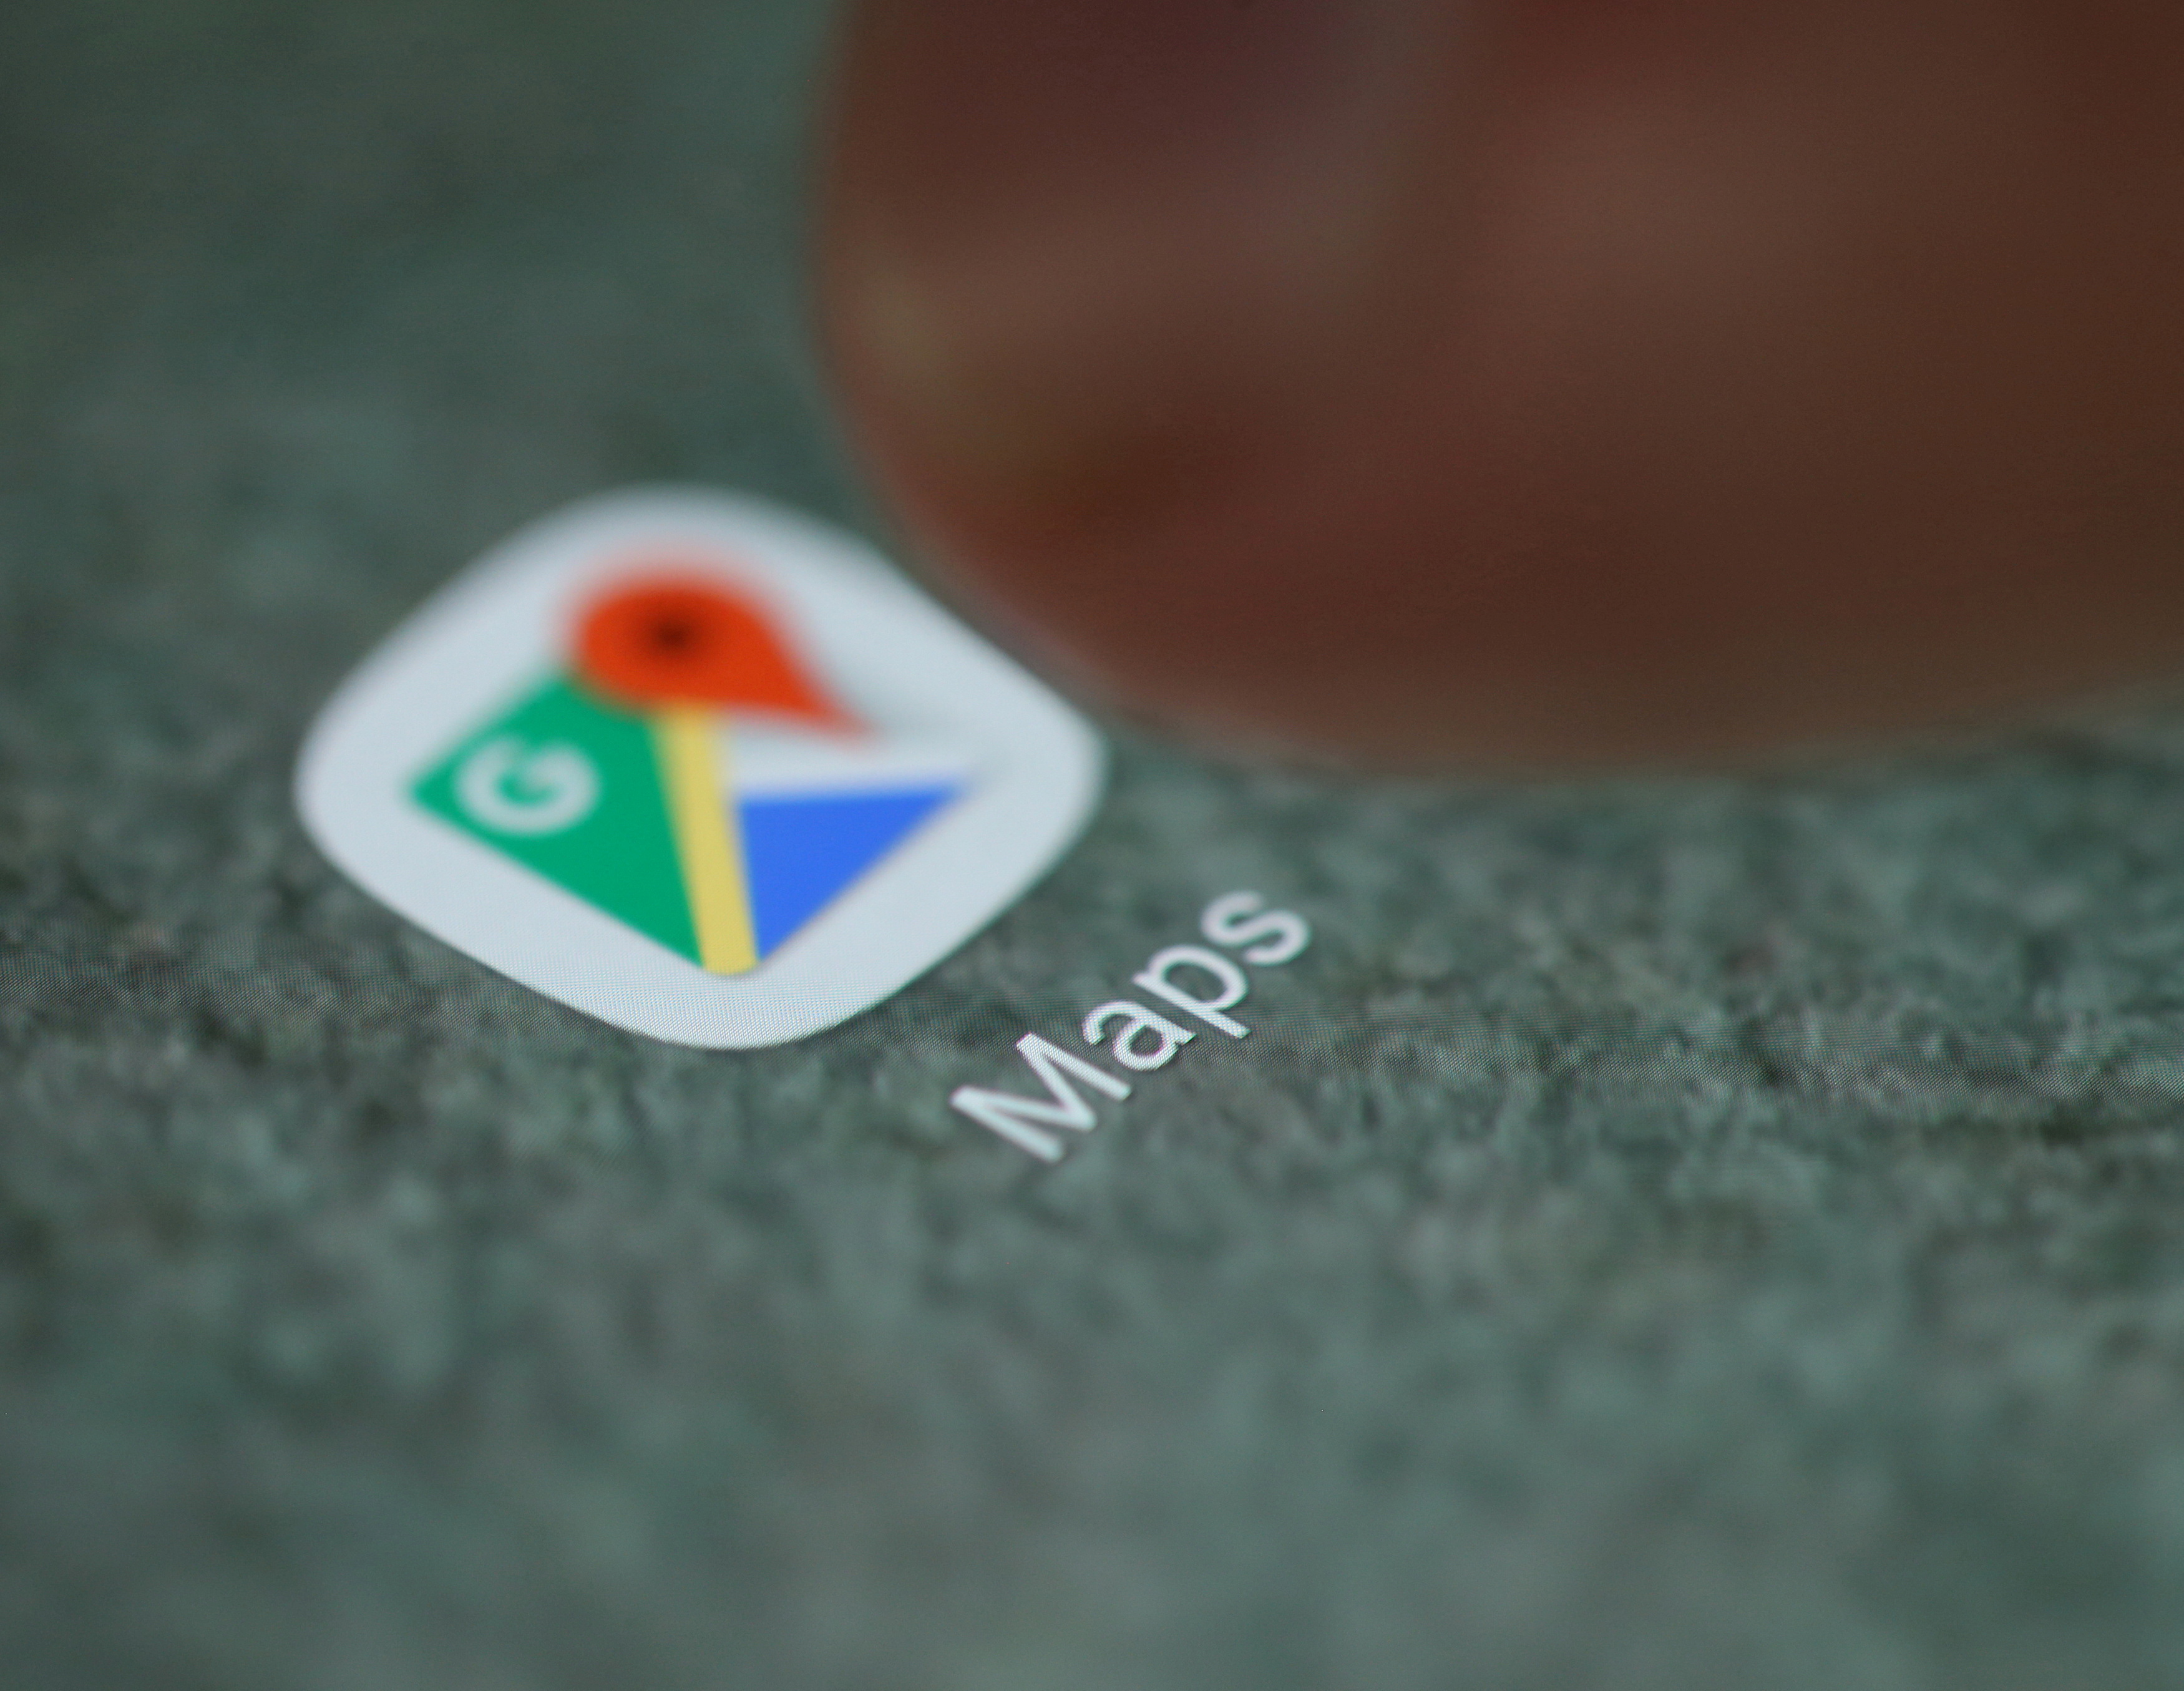 The Google Maps app logo is seen on a smartphone in this illustration